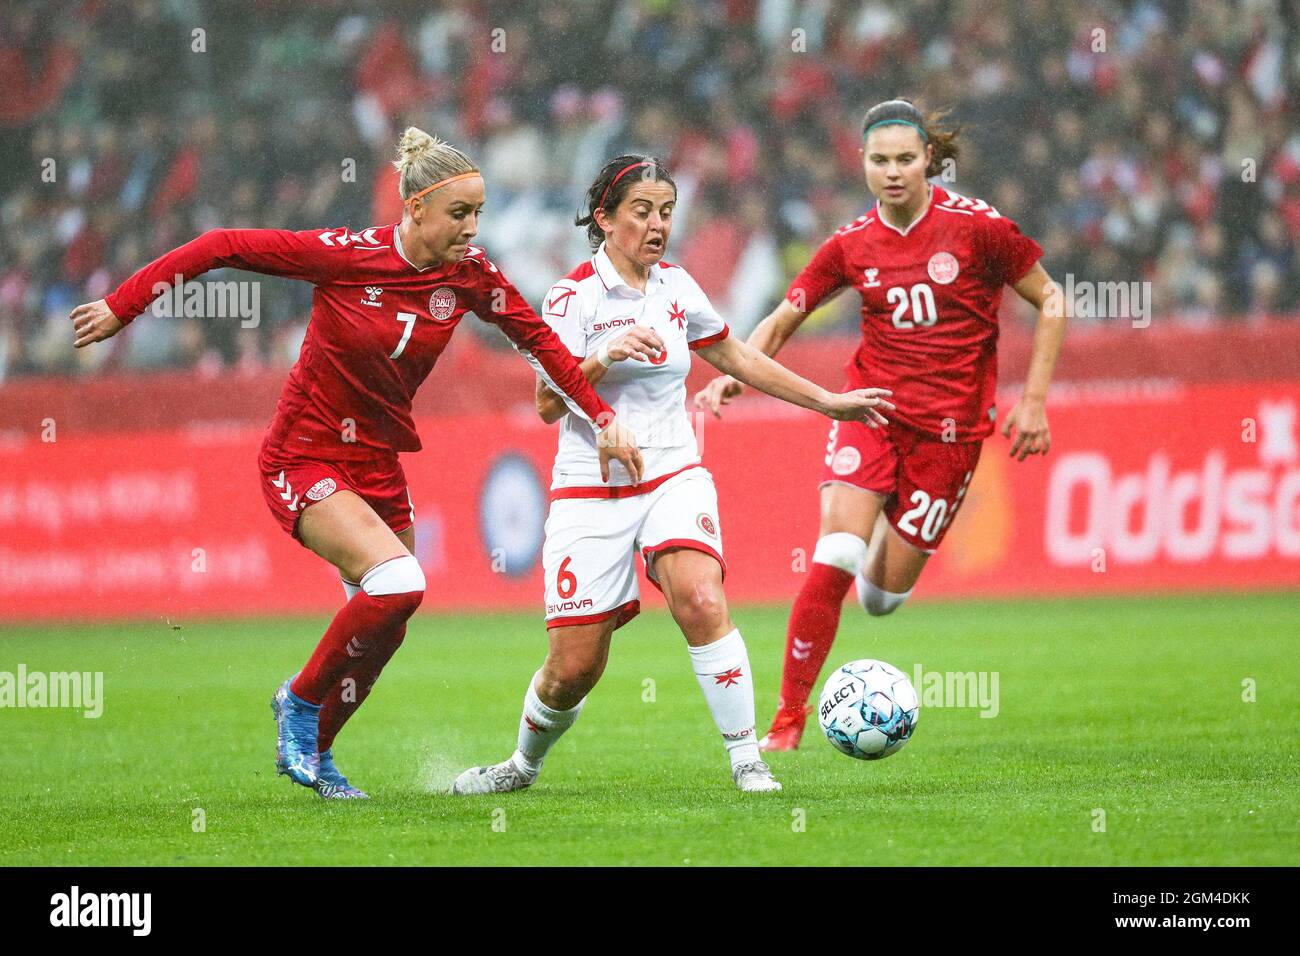 Viborg, Denmark. 16th Sep, 2021. Sanne Troelsgaard (7 DEN) tries to win the  ball from Dorianne Theuma (6 MALTA) during a WWC2023 qualification match on  September 16th 2021 between Denmark and Malta